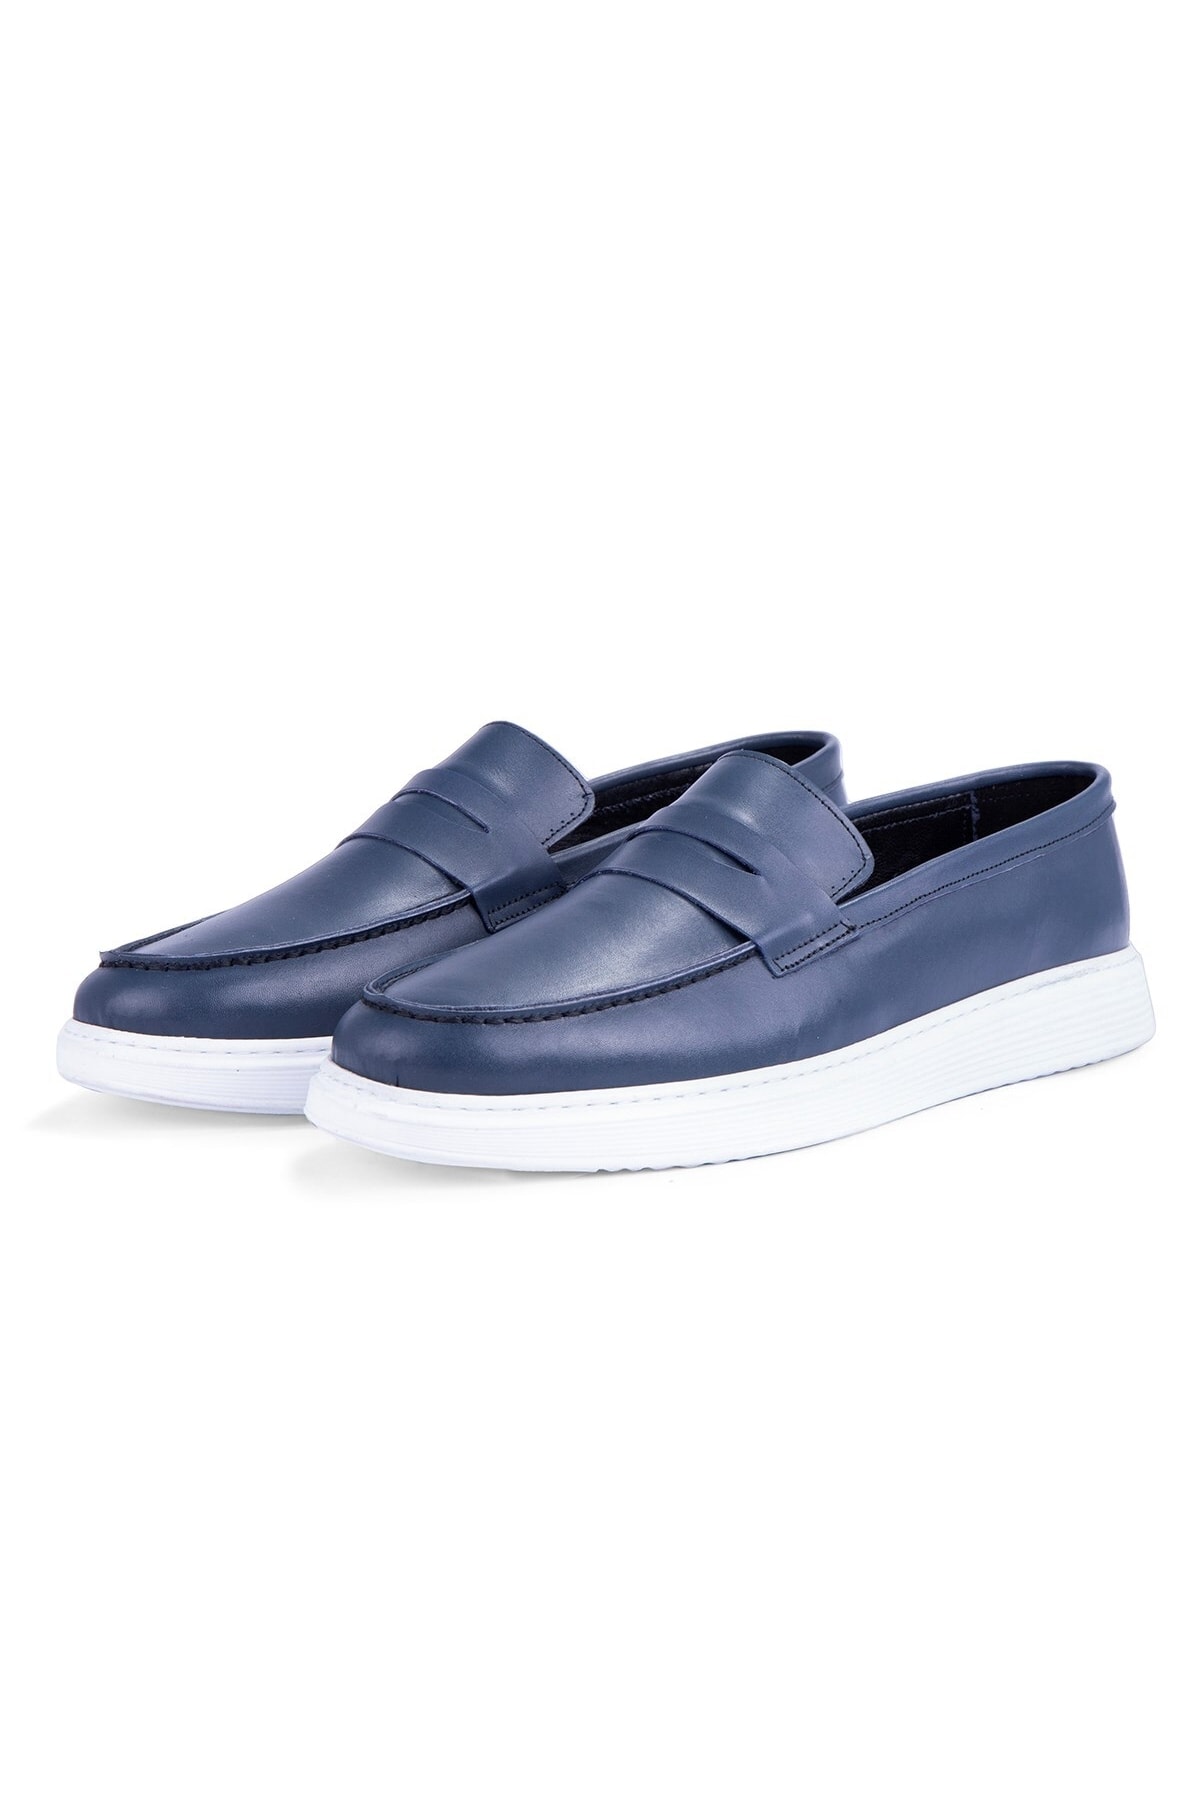 Ducavelli Trim Genuine Leather Men's Casual Shoes Loafers, Lightweight Shoes, Summer Shoes Navy Blue.